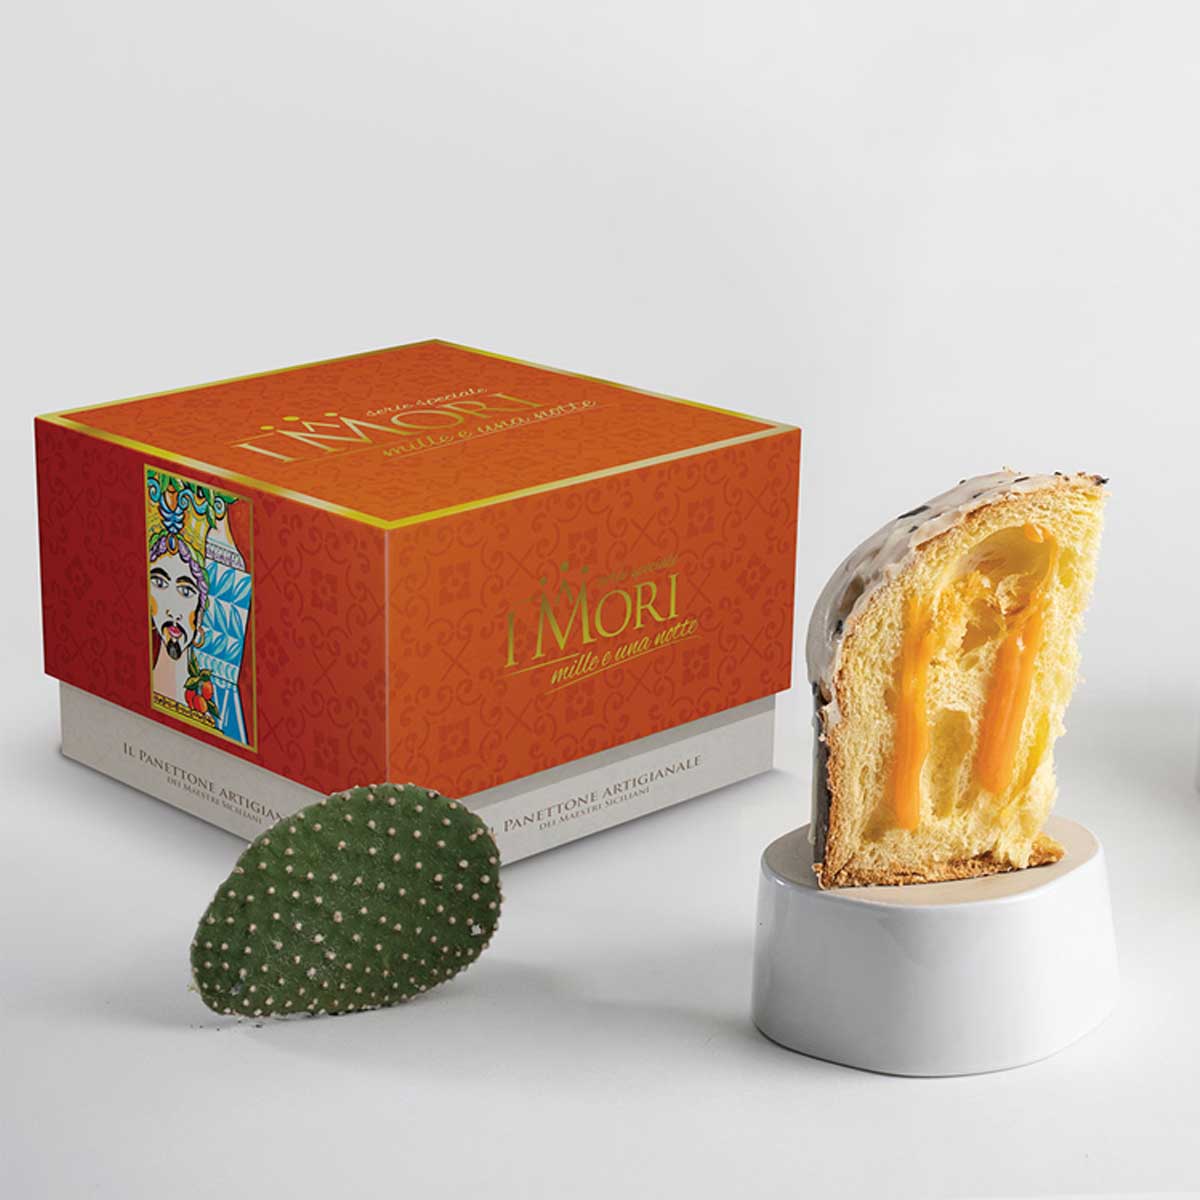 Wholesale i Mori Sicilian Prickly Pear Jam Panettone with Icing